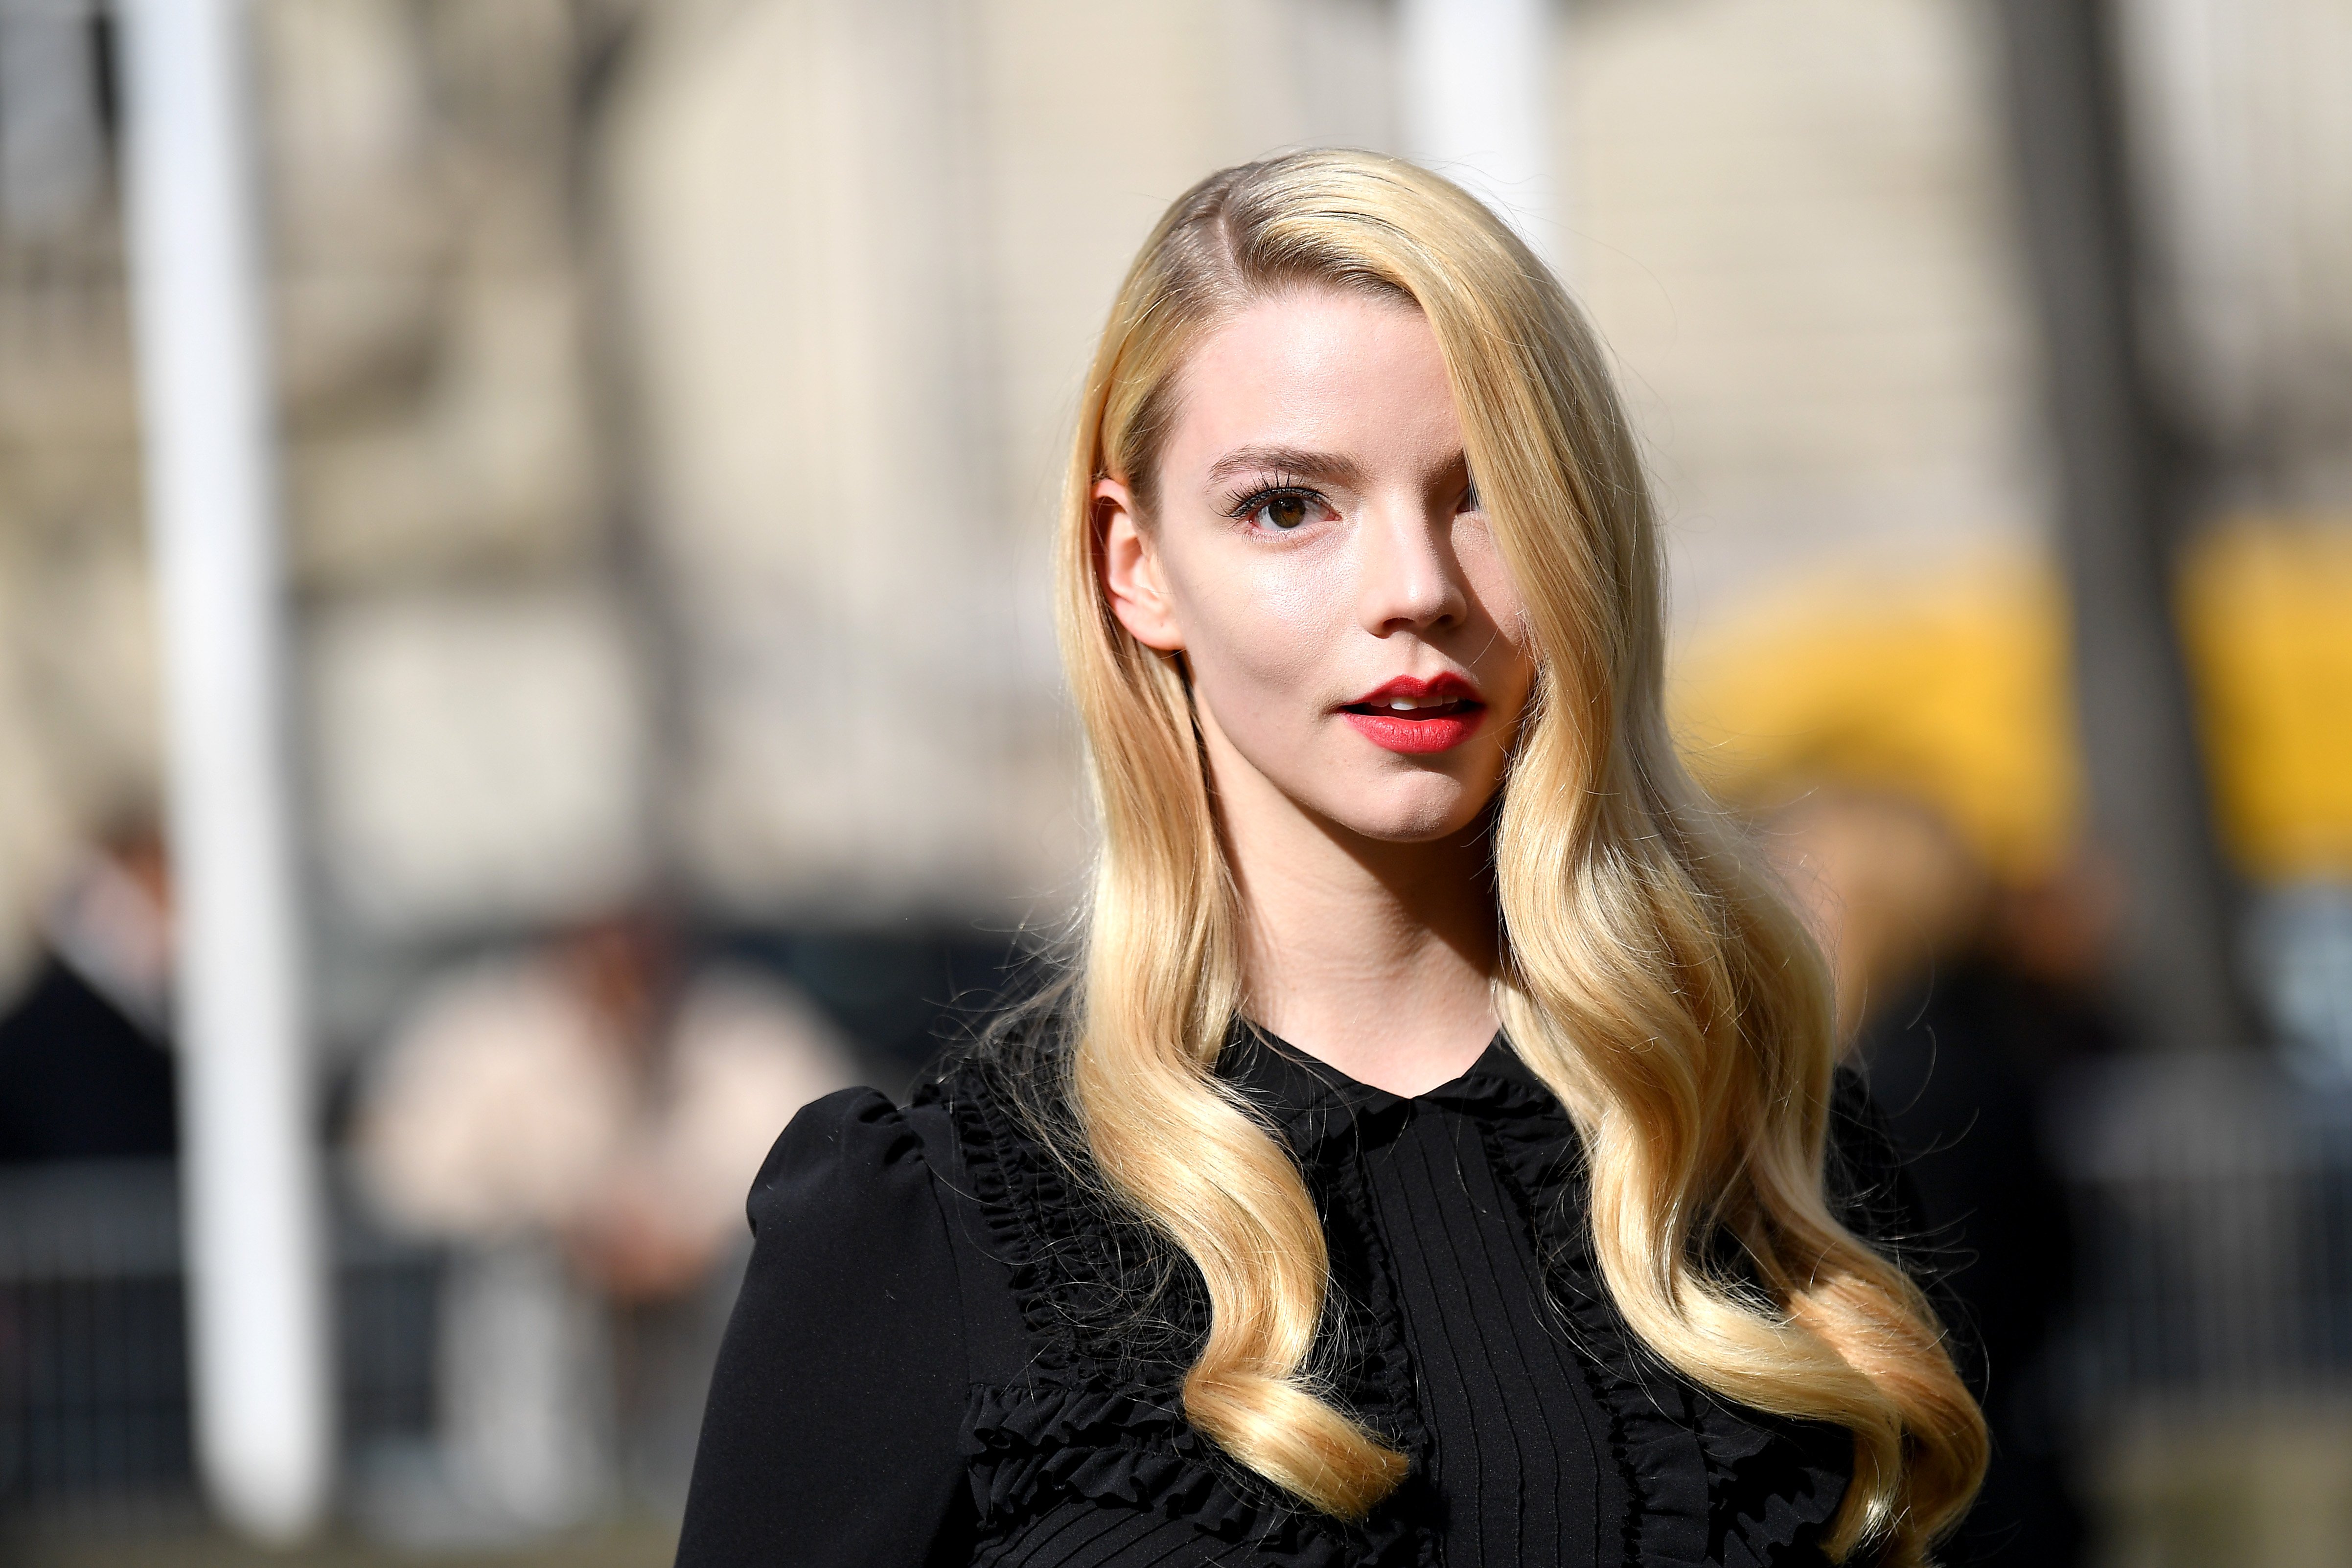 Anya Taylor-Joy attends the Miu Miu show as part of the Paris Fashion Week Womenswear Fall/Winter 2020/2021 on March 3, 2020 in Paris, France. | Photo: Getty Images